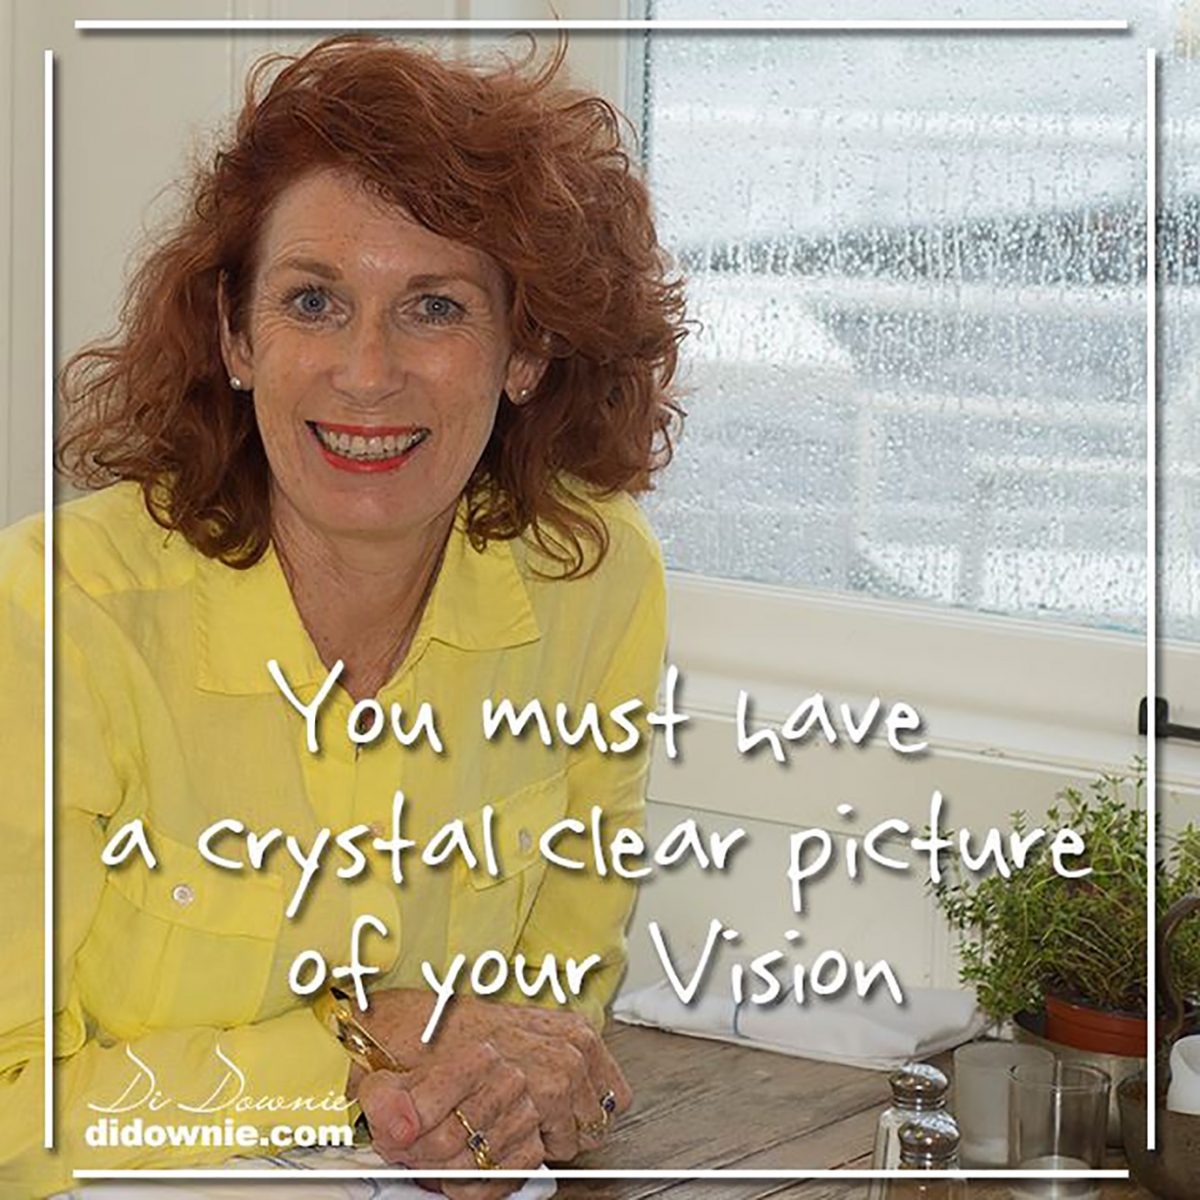 Women and Vision